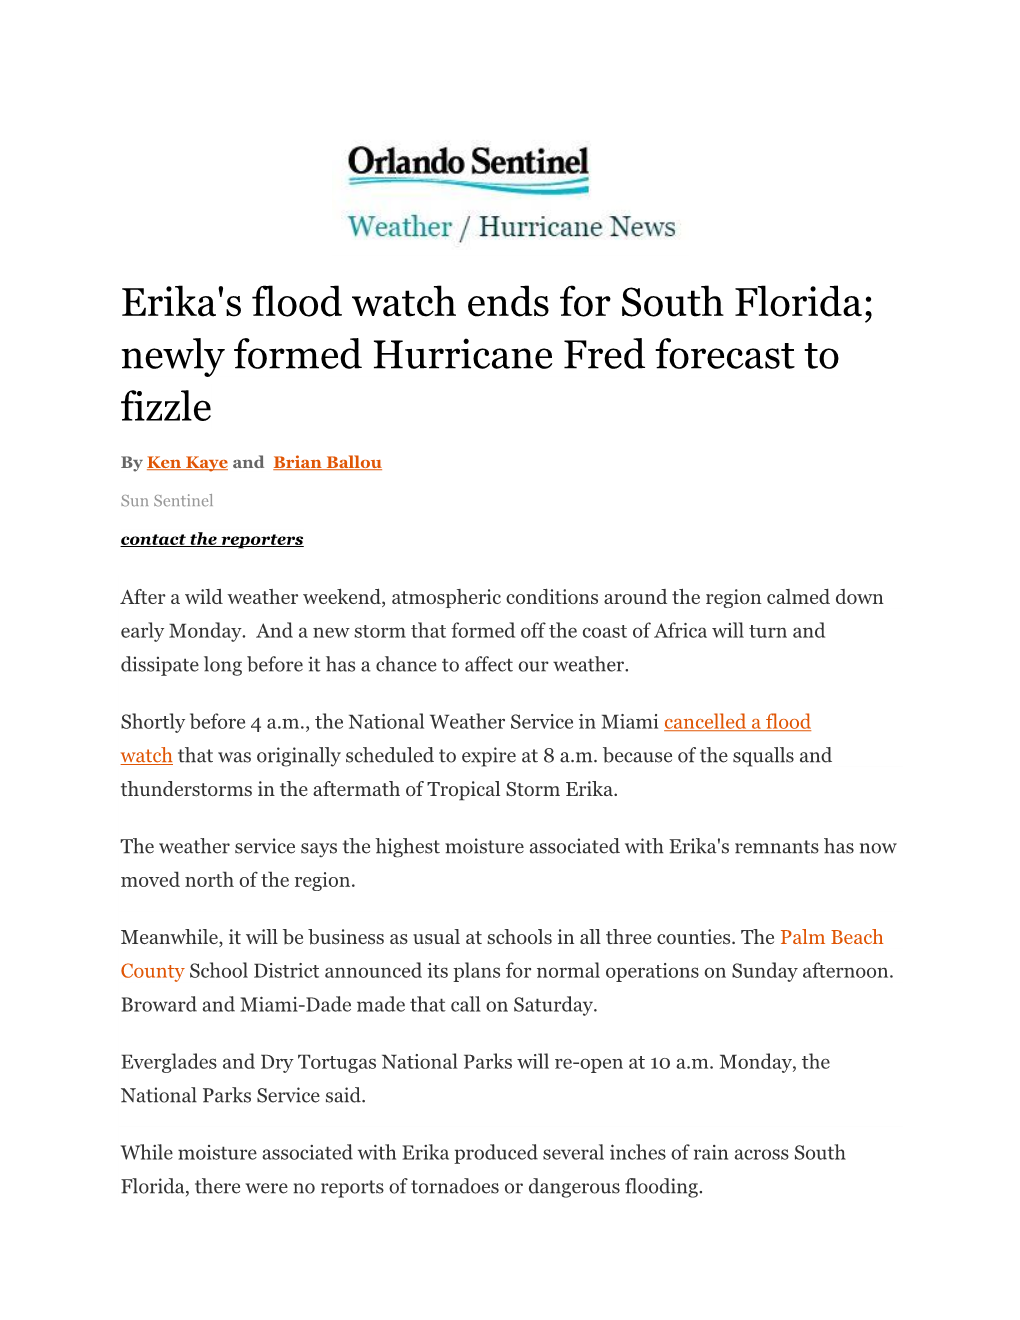 Newly Formed Hurricane Fred Forecast to Fizzle